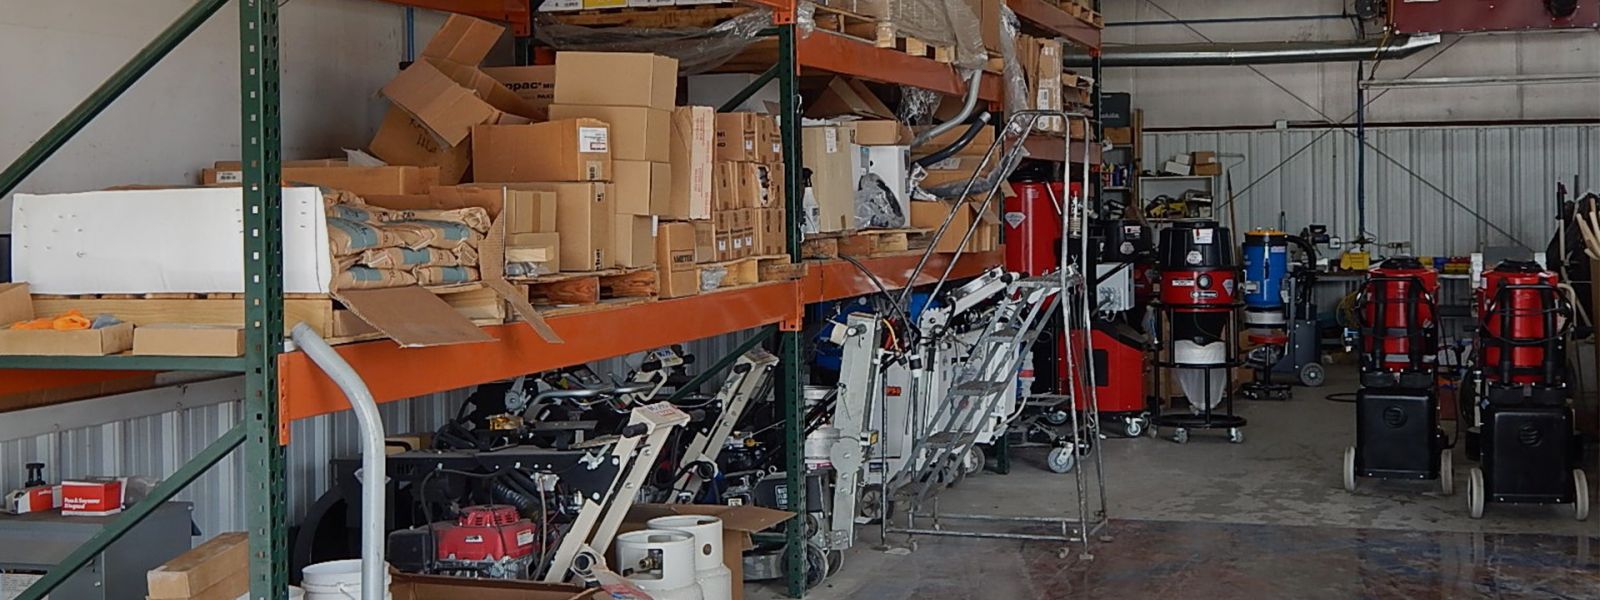 Dust control and other vacuum equipment inside a warehouse